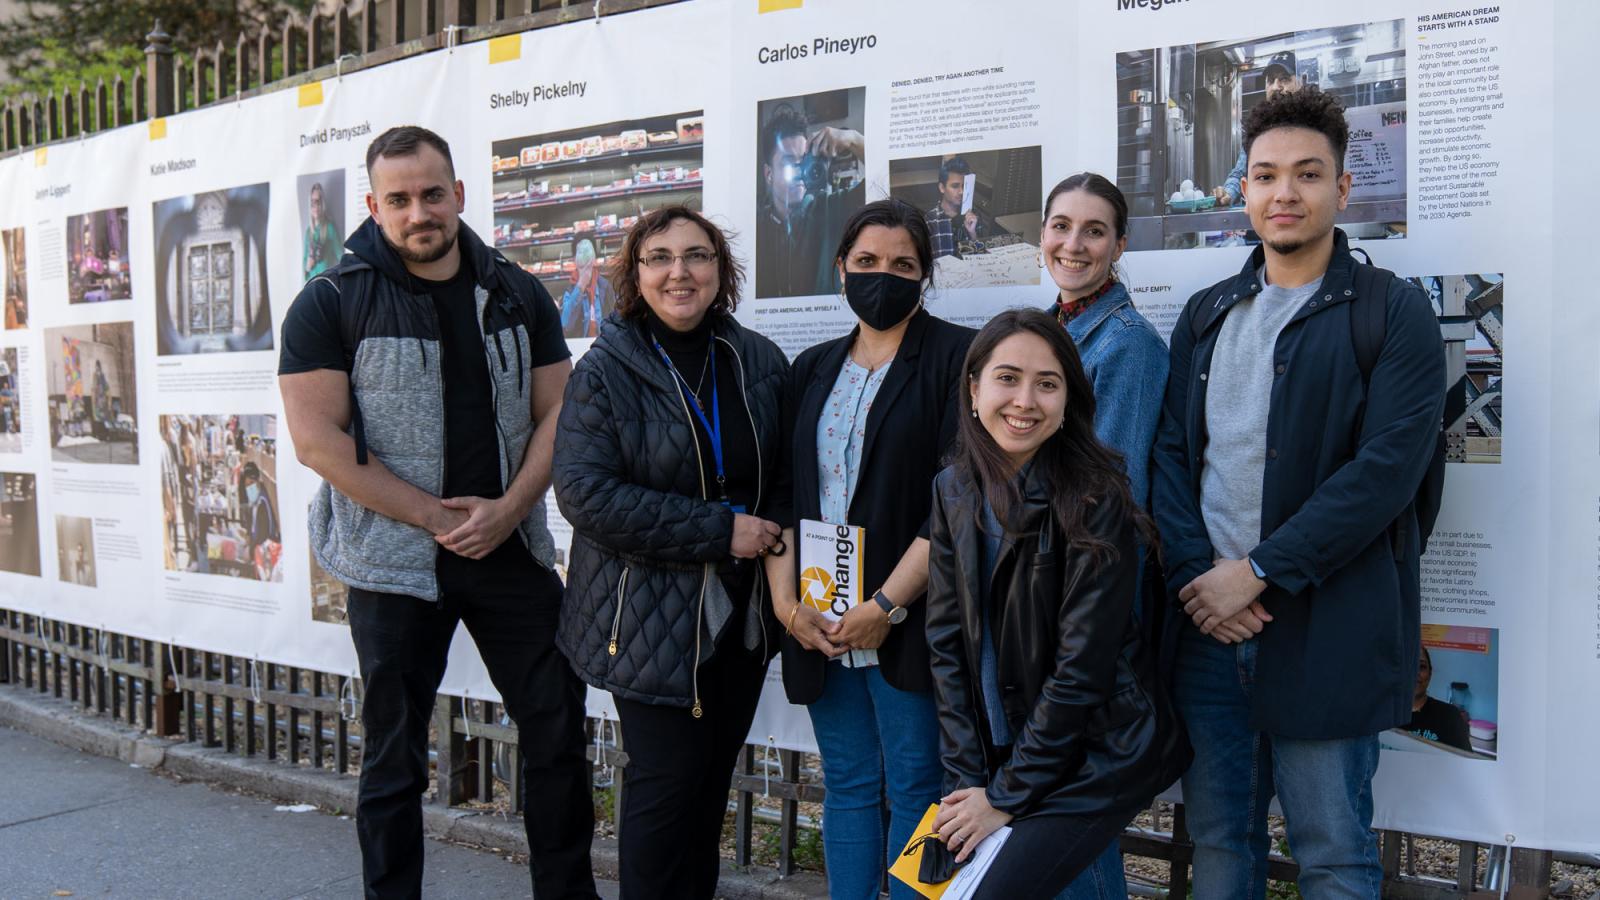 group of people in front of a photo exhibit